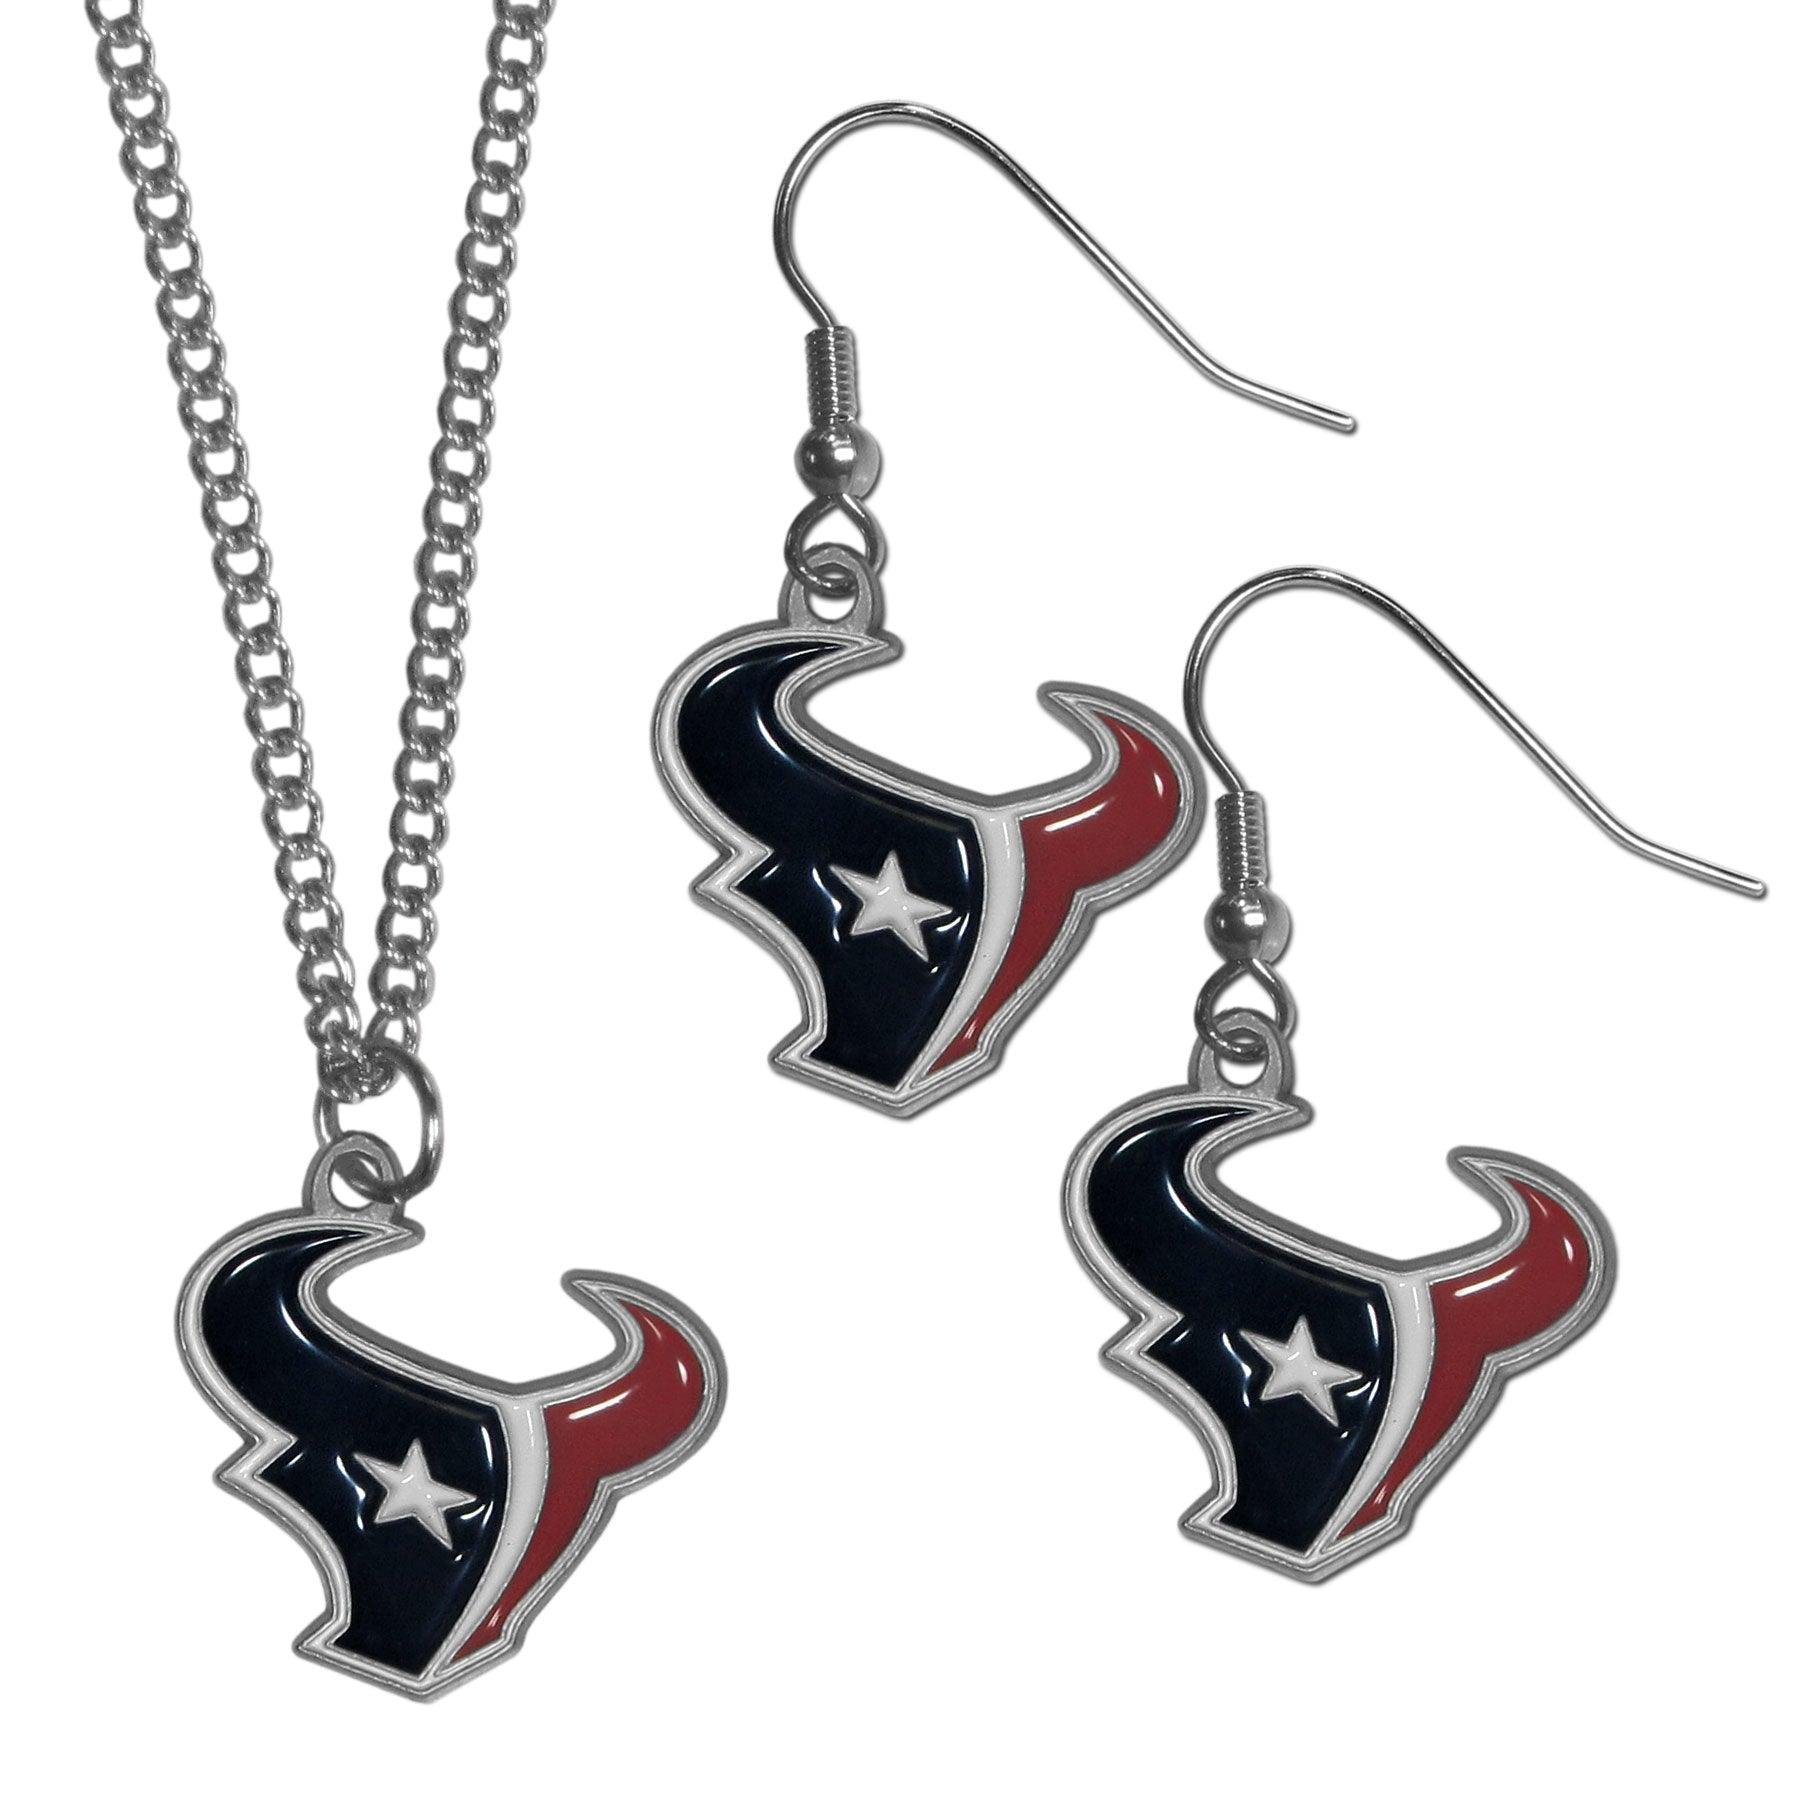 Houston Texans Dangle Earrings and Chain Necklace Set - Flyclothing LLC